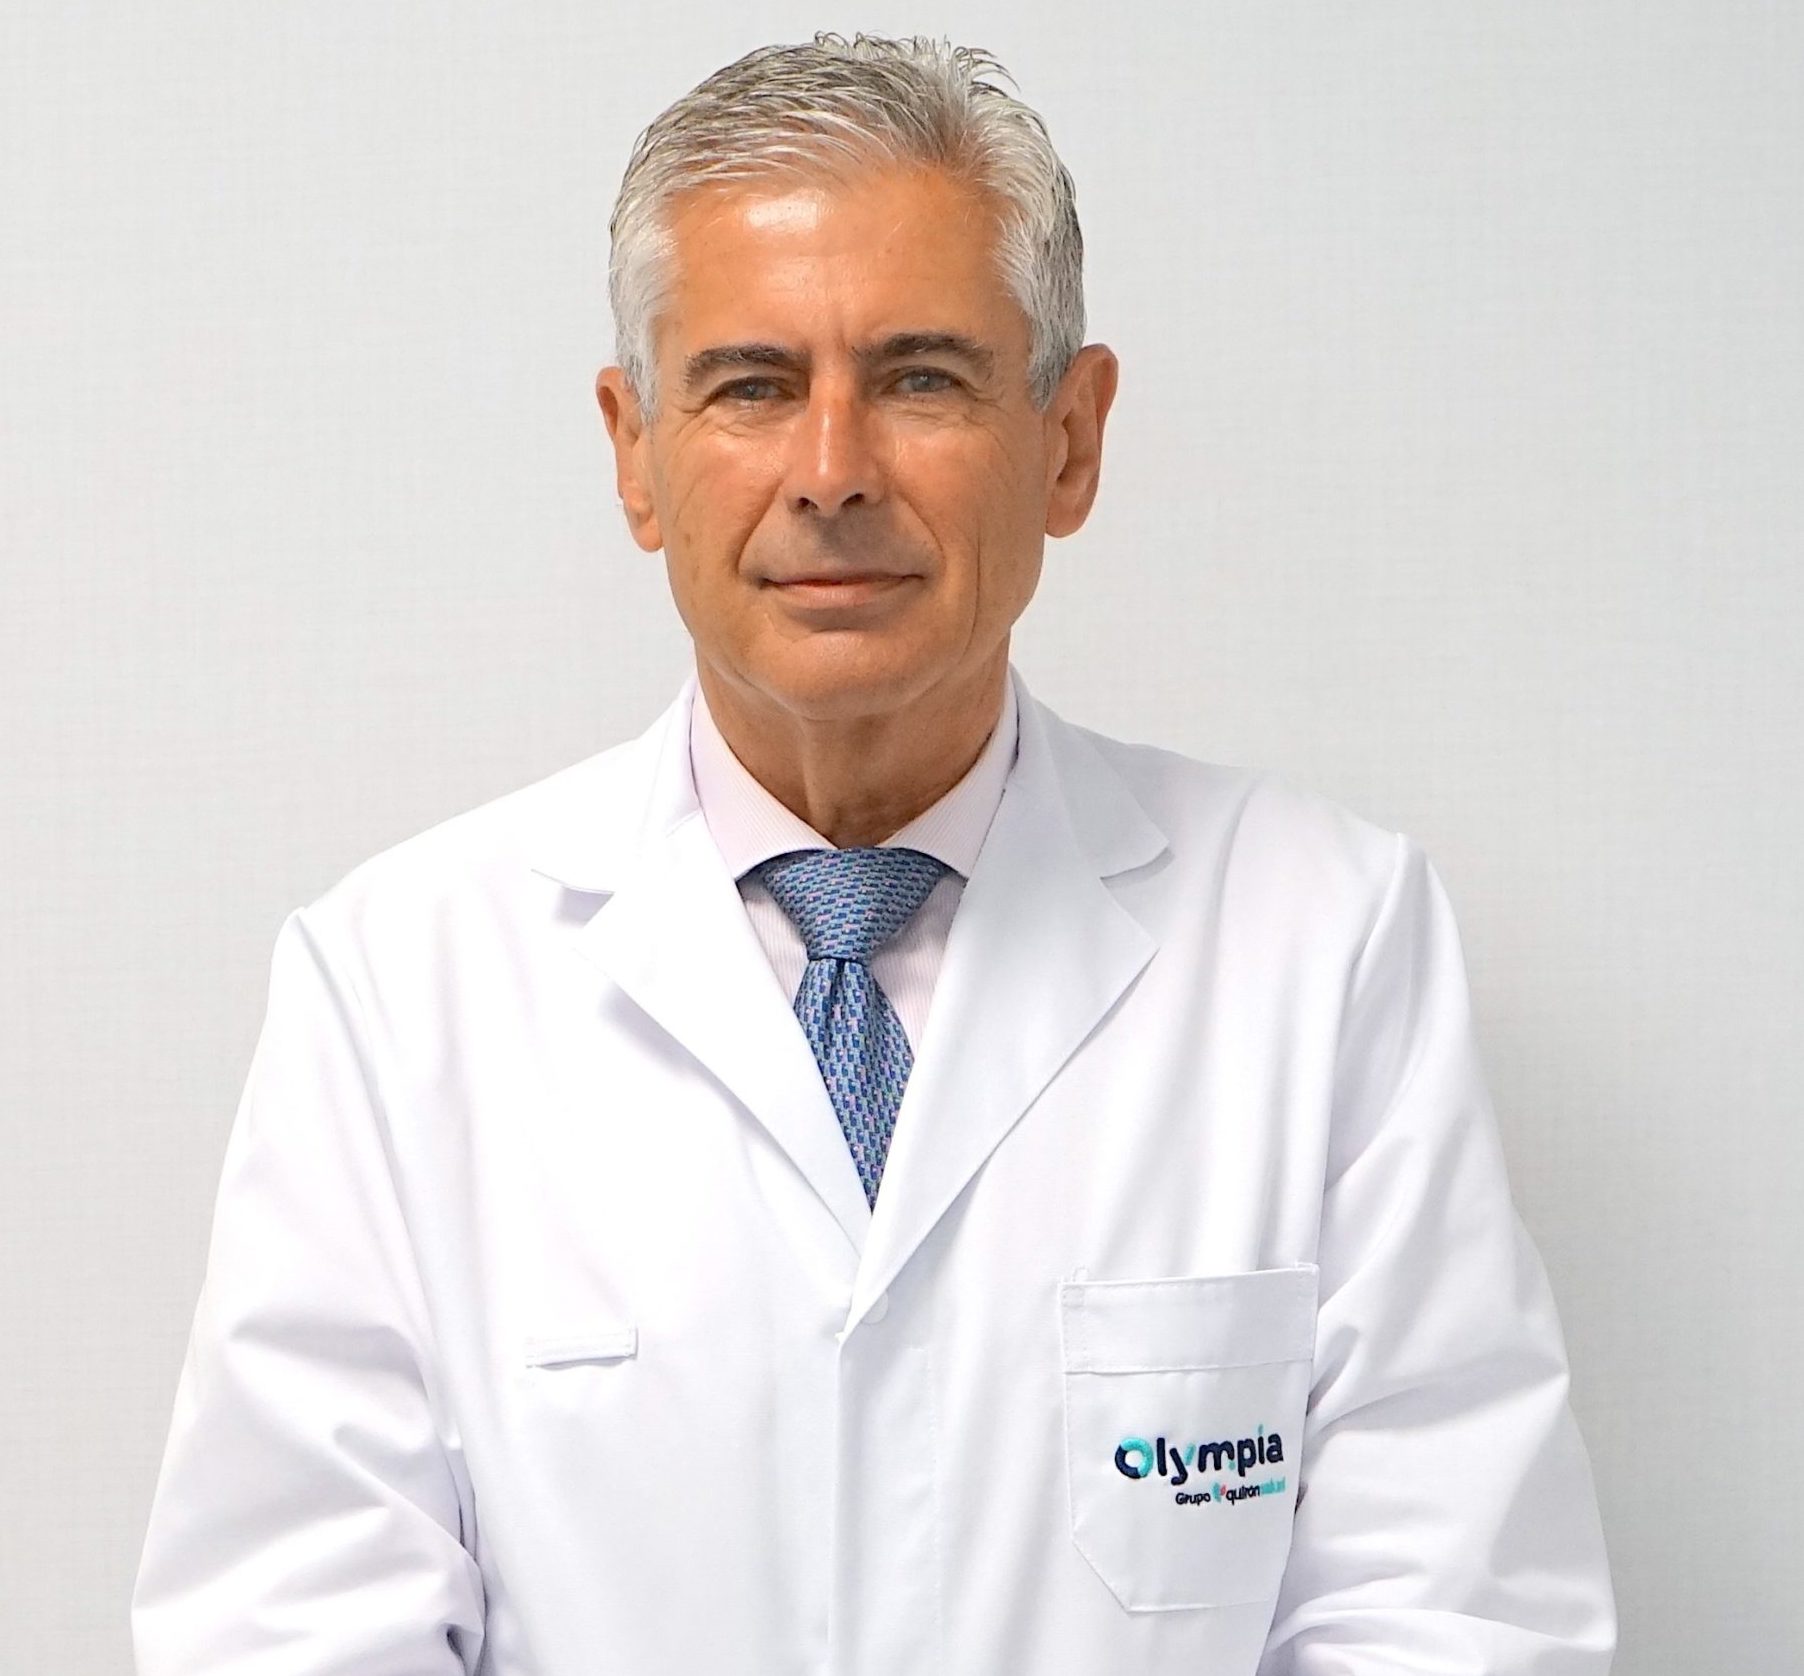 Dr. Miguel Fernández Tapia-Ruano